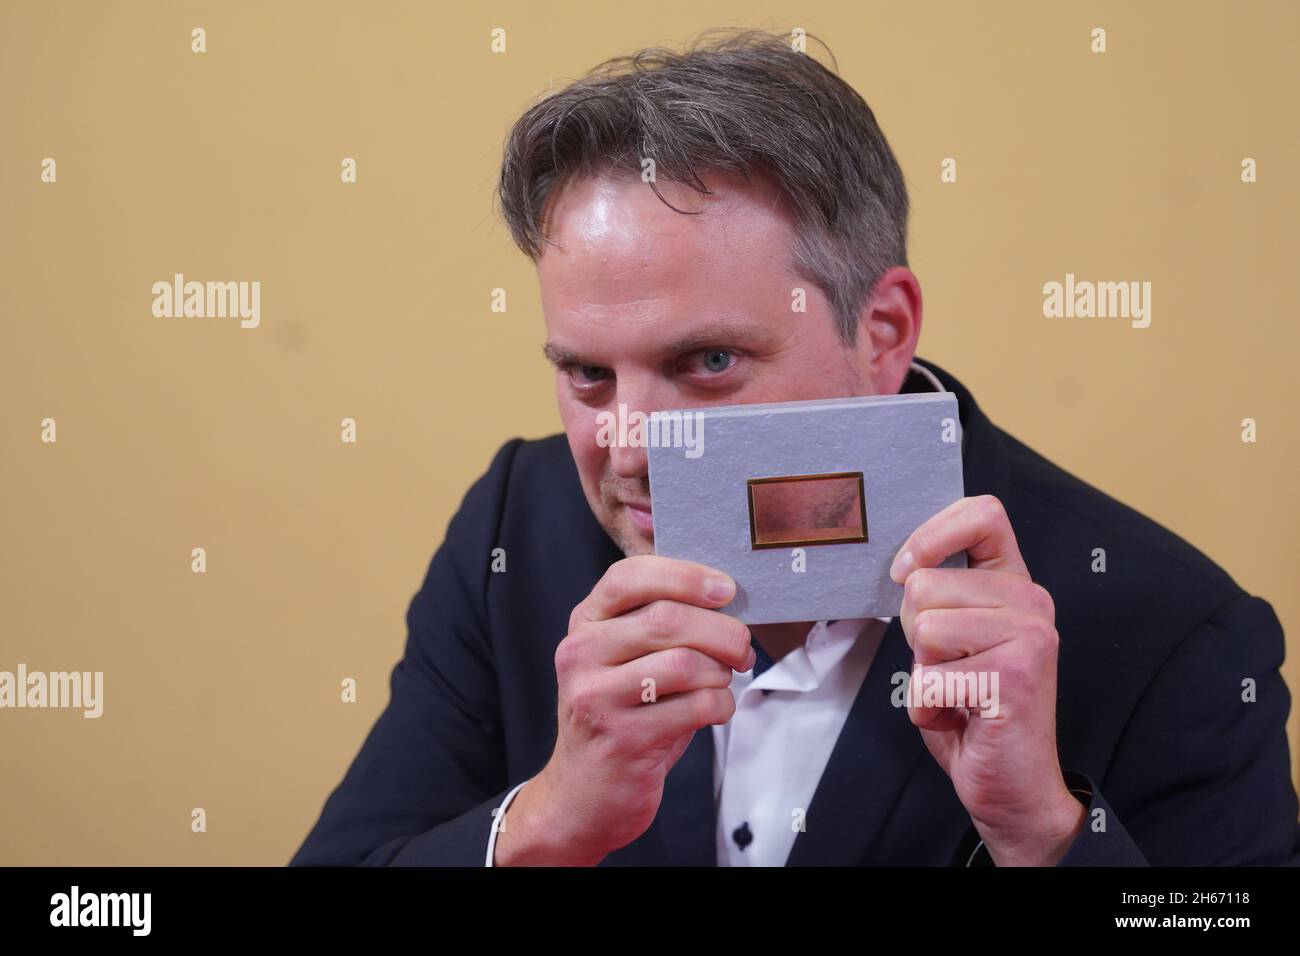 Berlin, Germany. 13th Nov, 2021. Cinematographer Michael Schreitel receives an award in the category 'Image Design' at the DAfF (German Academy for Television) awards ceremony at the Babylon cinema. Credit: Jörg Carstensen/dpa/Alamy Live News Stock Photo